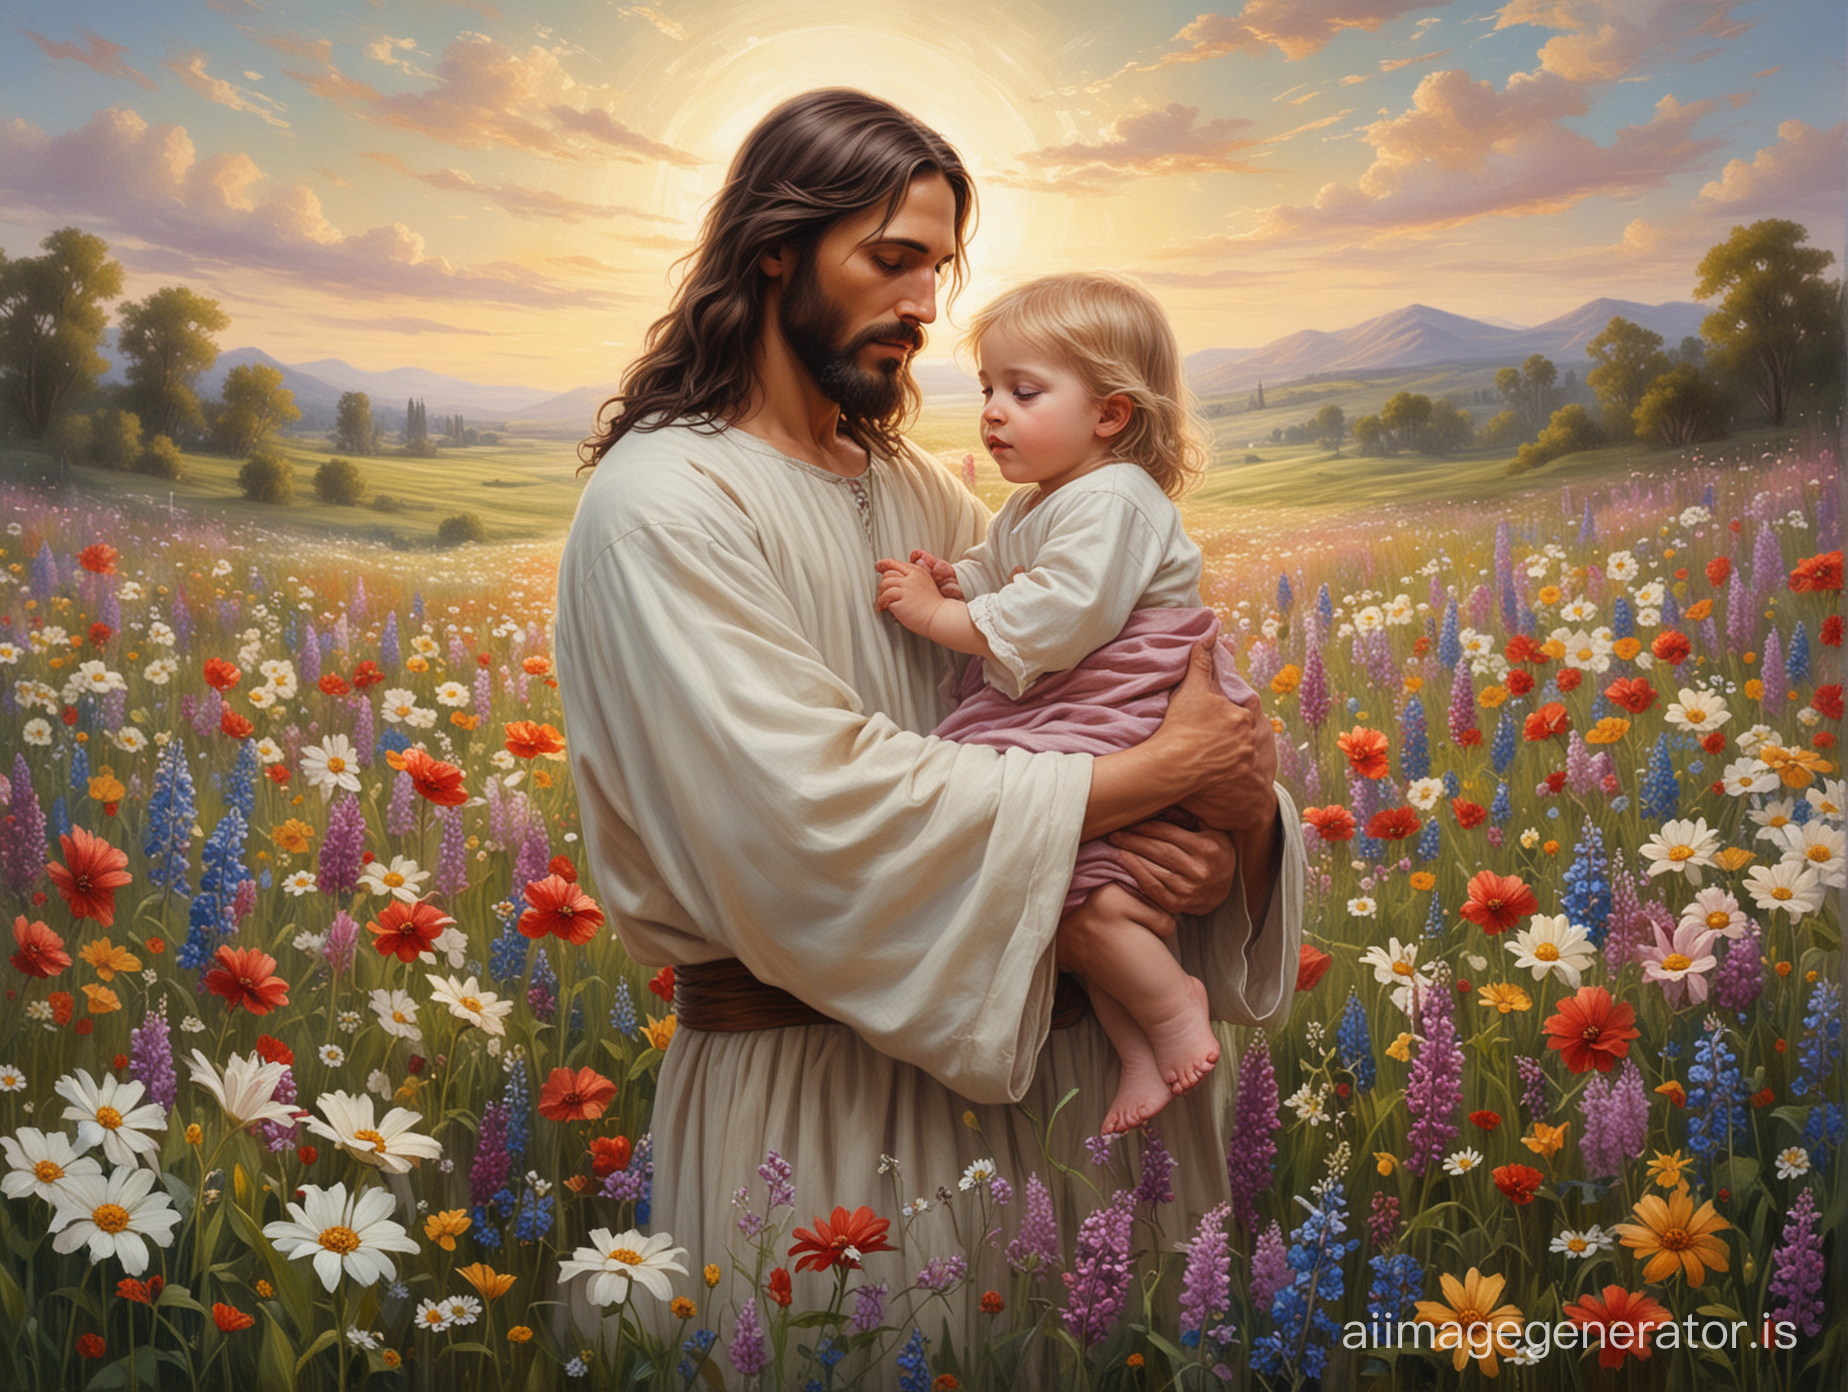 a painting of jesus holding a child in a field of flowers, an oil on canvas painting by Pamela Ascherson, shutterstock, gothic art, I can't believe how beautiful this is, deviantart hd, made of flowers